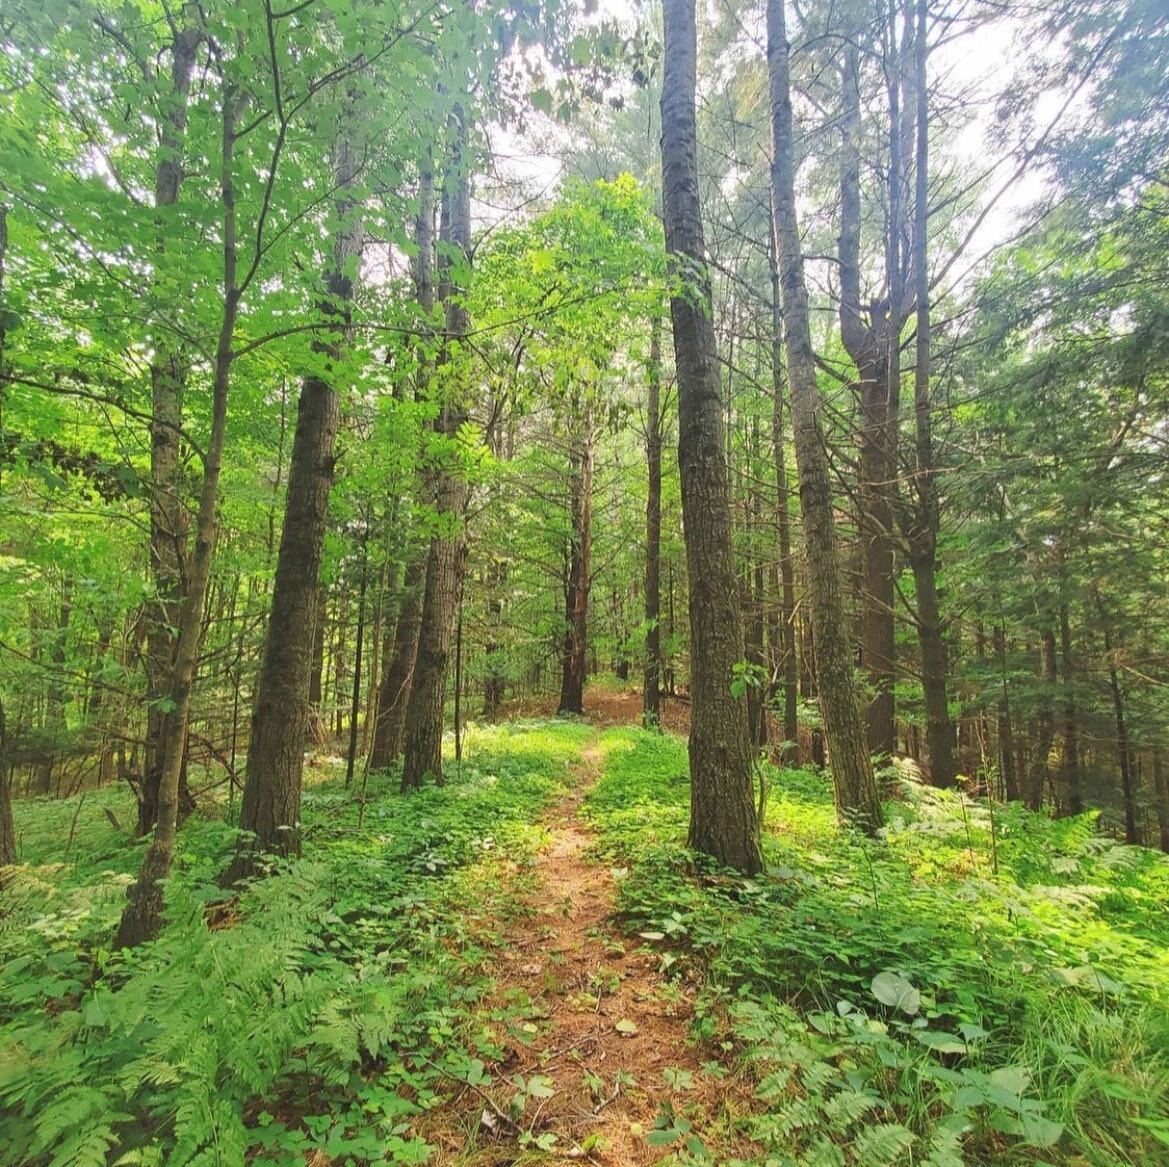 Join us this Sunday at 2 PM for a free guided science walk in the forest at Otter Lake Esker Preserve in Stanley, WI! Led by Doug Faulkner, Associate Professor of Geography and Anthropology at UW-Eau Claire, you&rsquo;ll learn about how this unique a